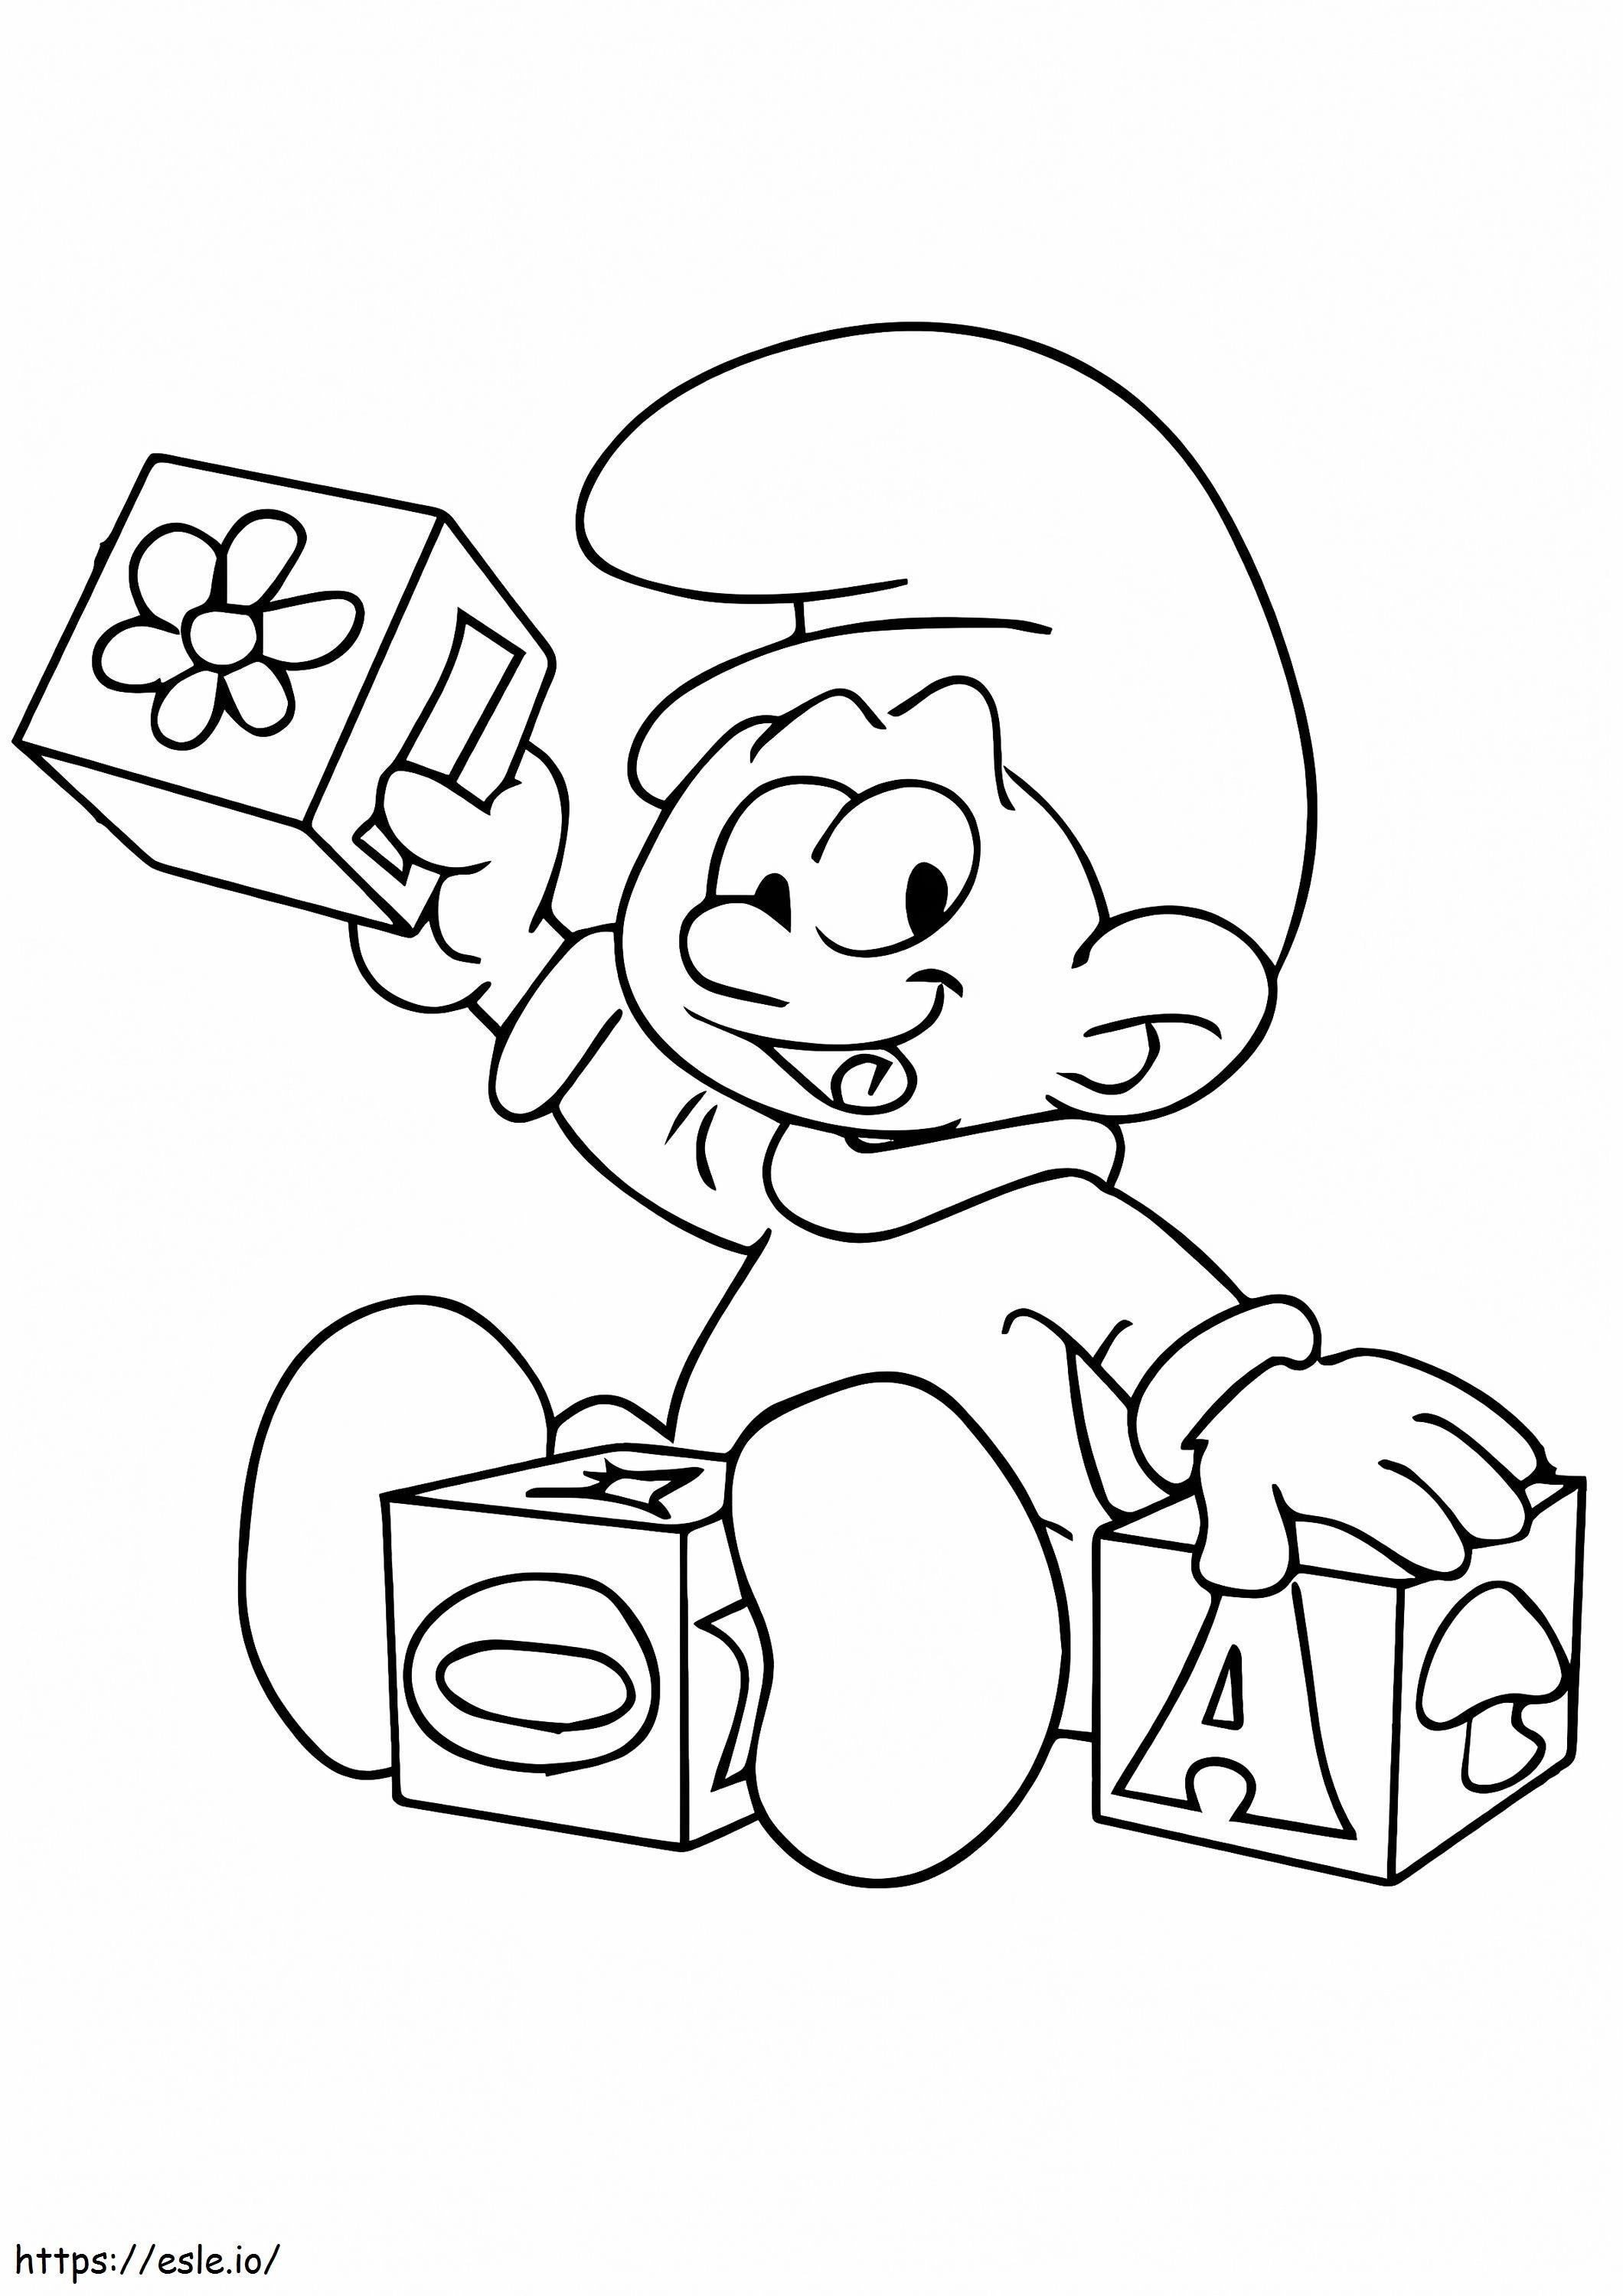 The Baby Smurf Playing A4 coloring page